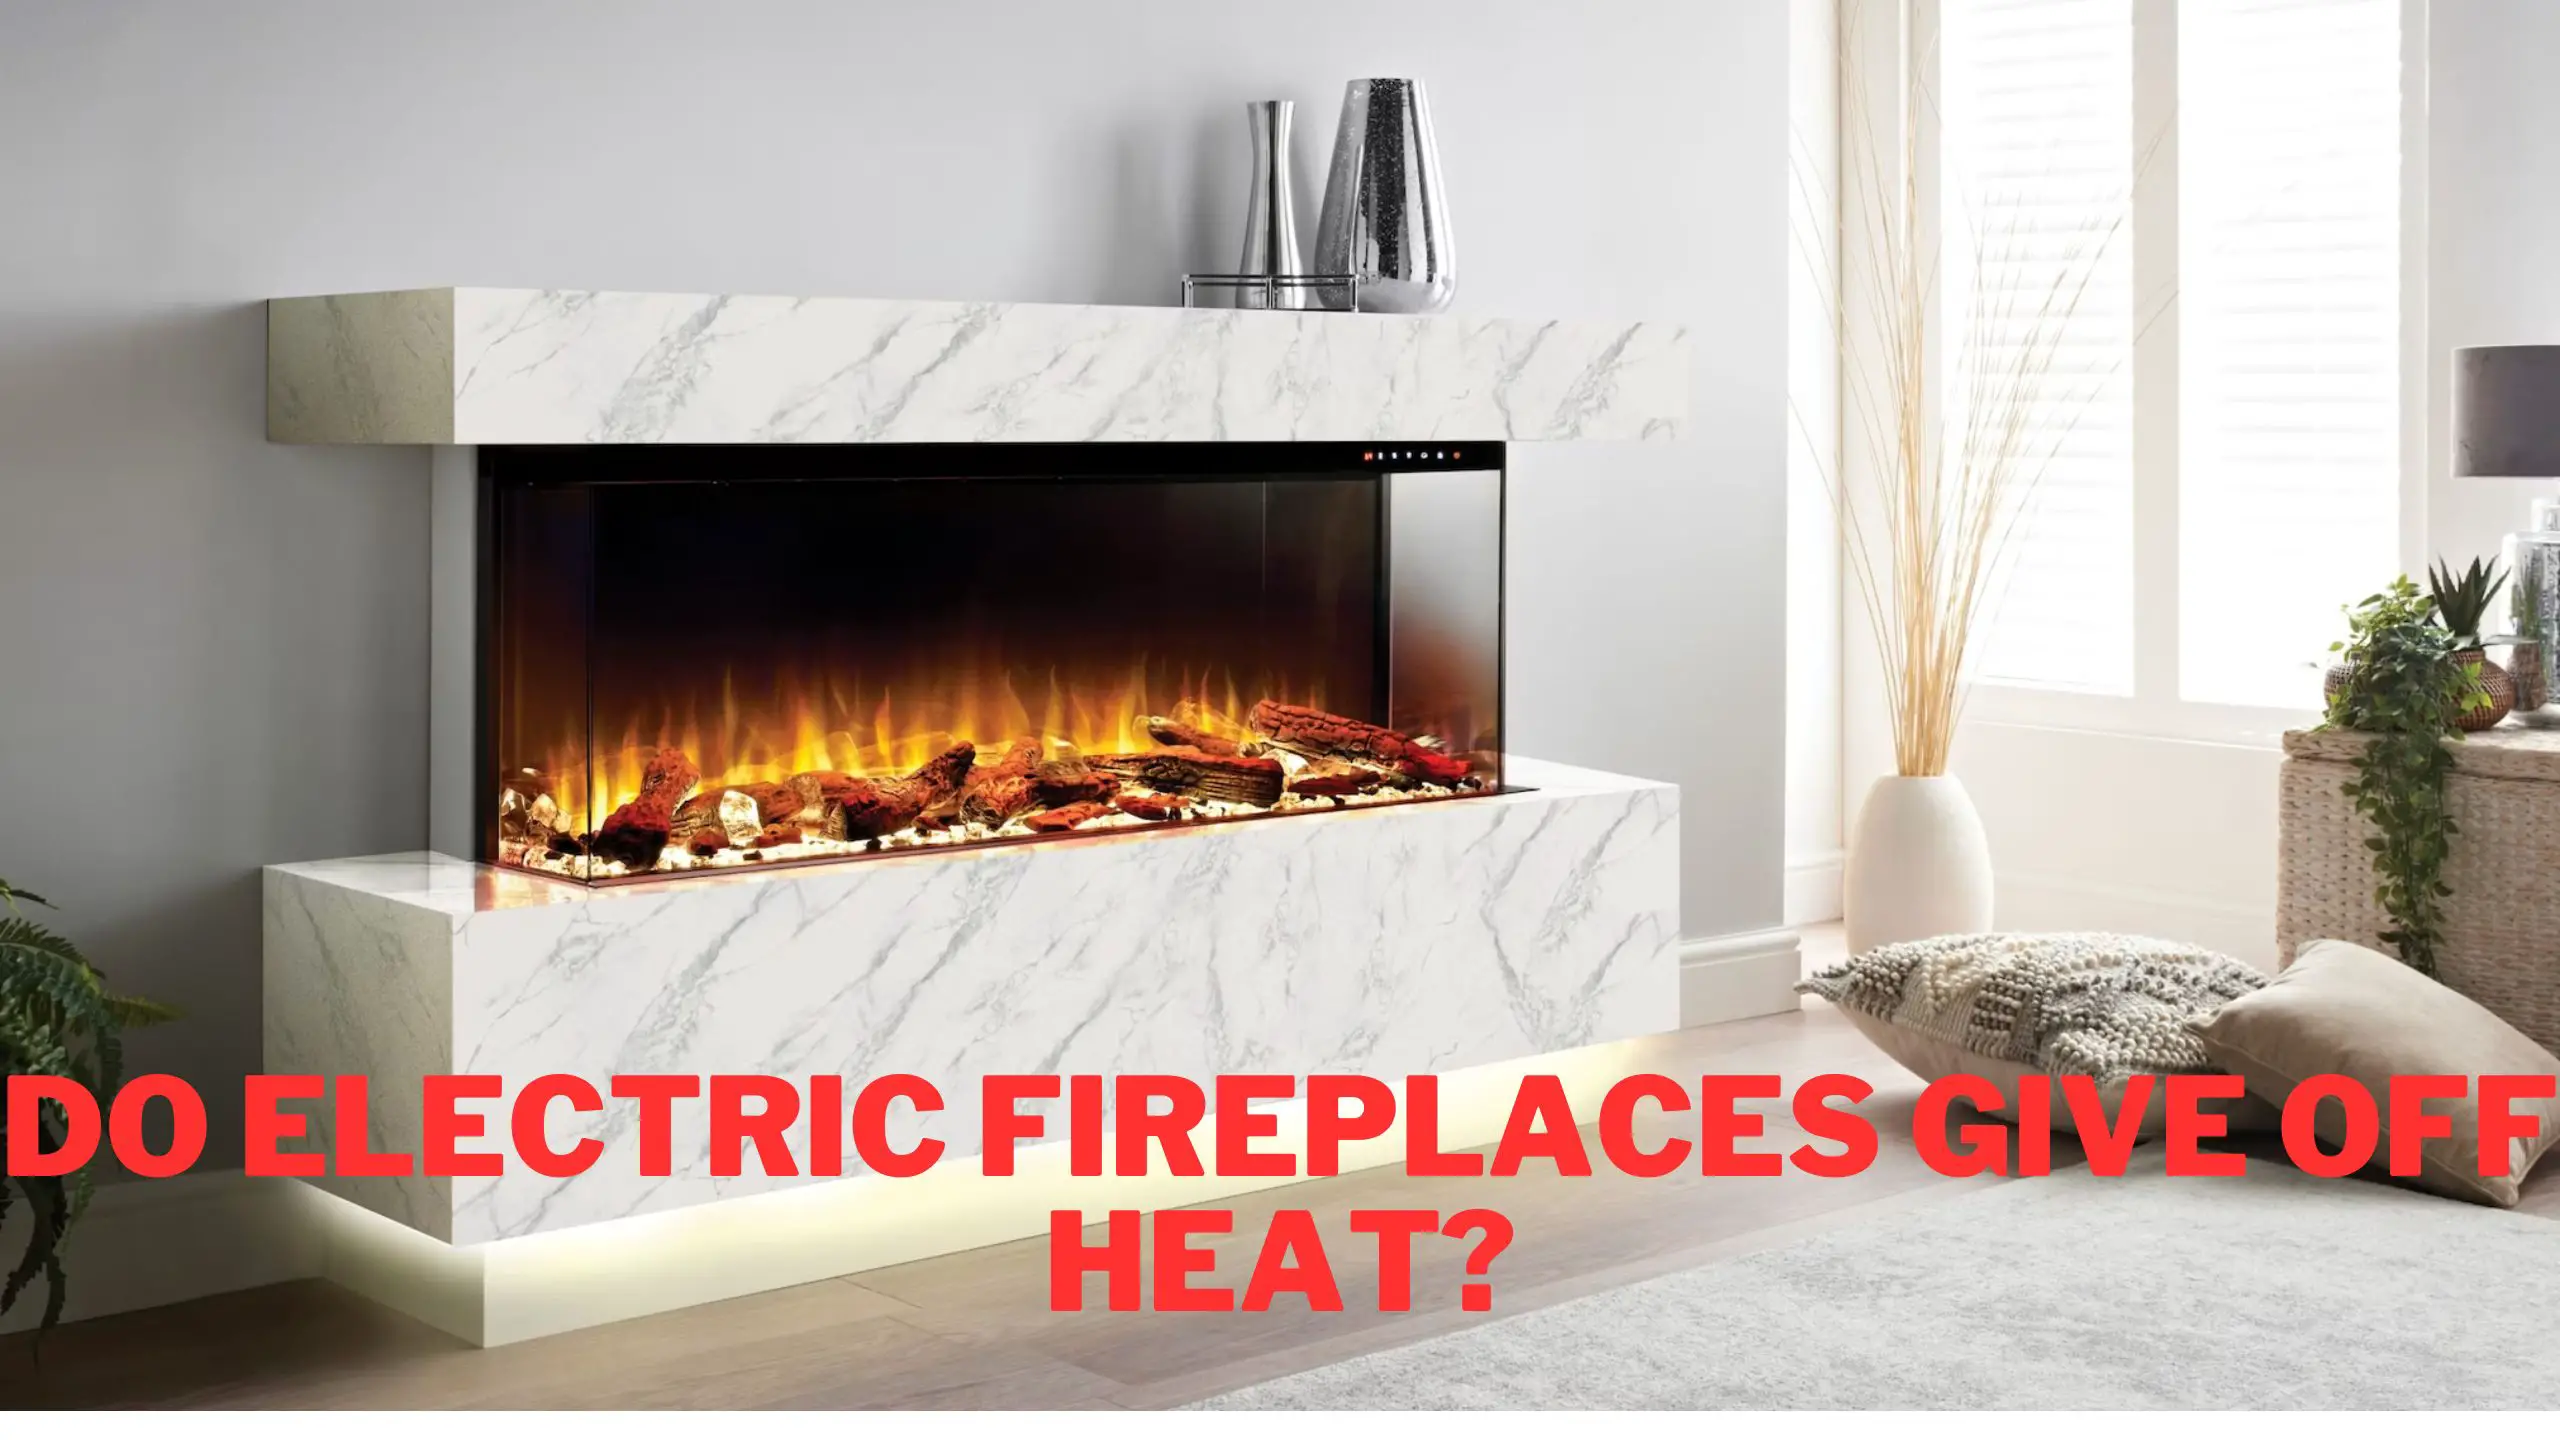 Do Electric Fireplaces Give off Heat